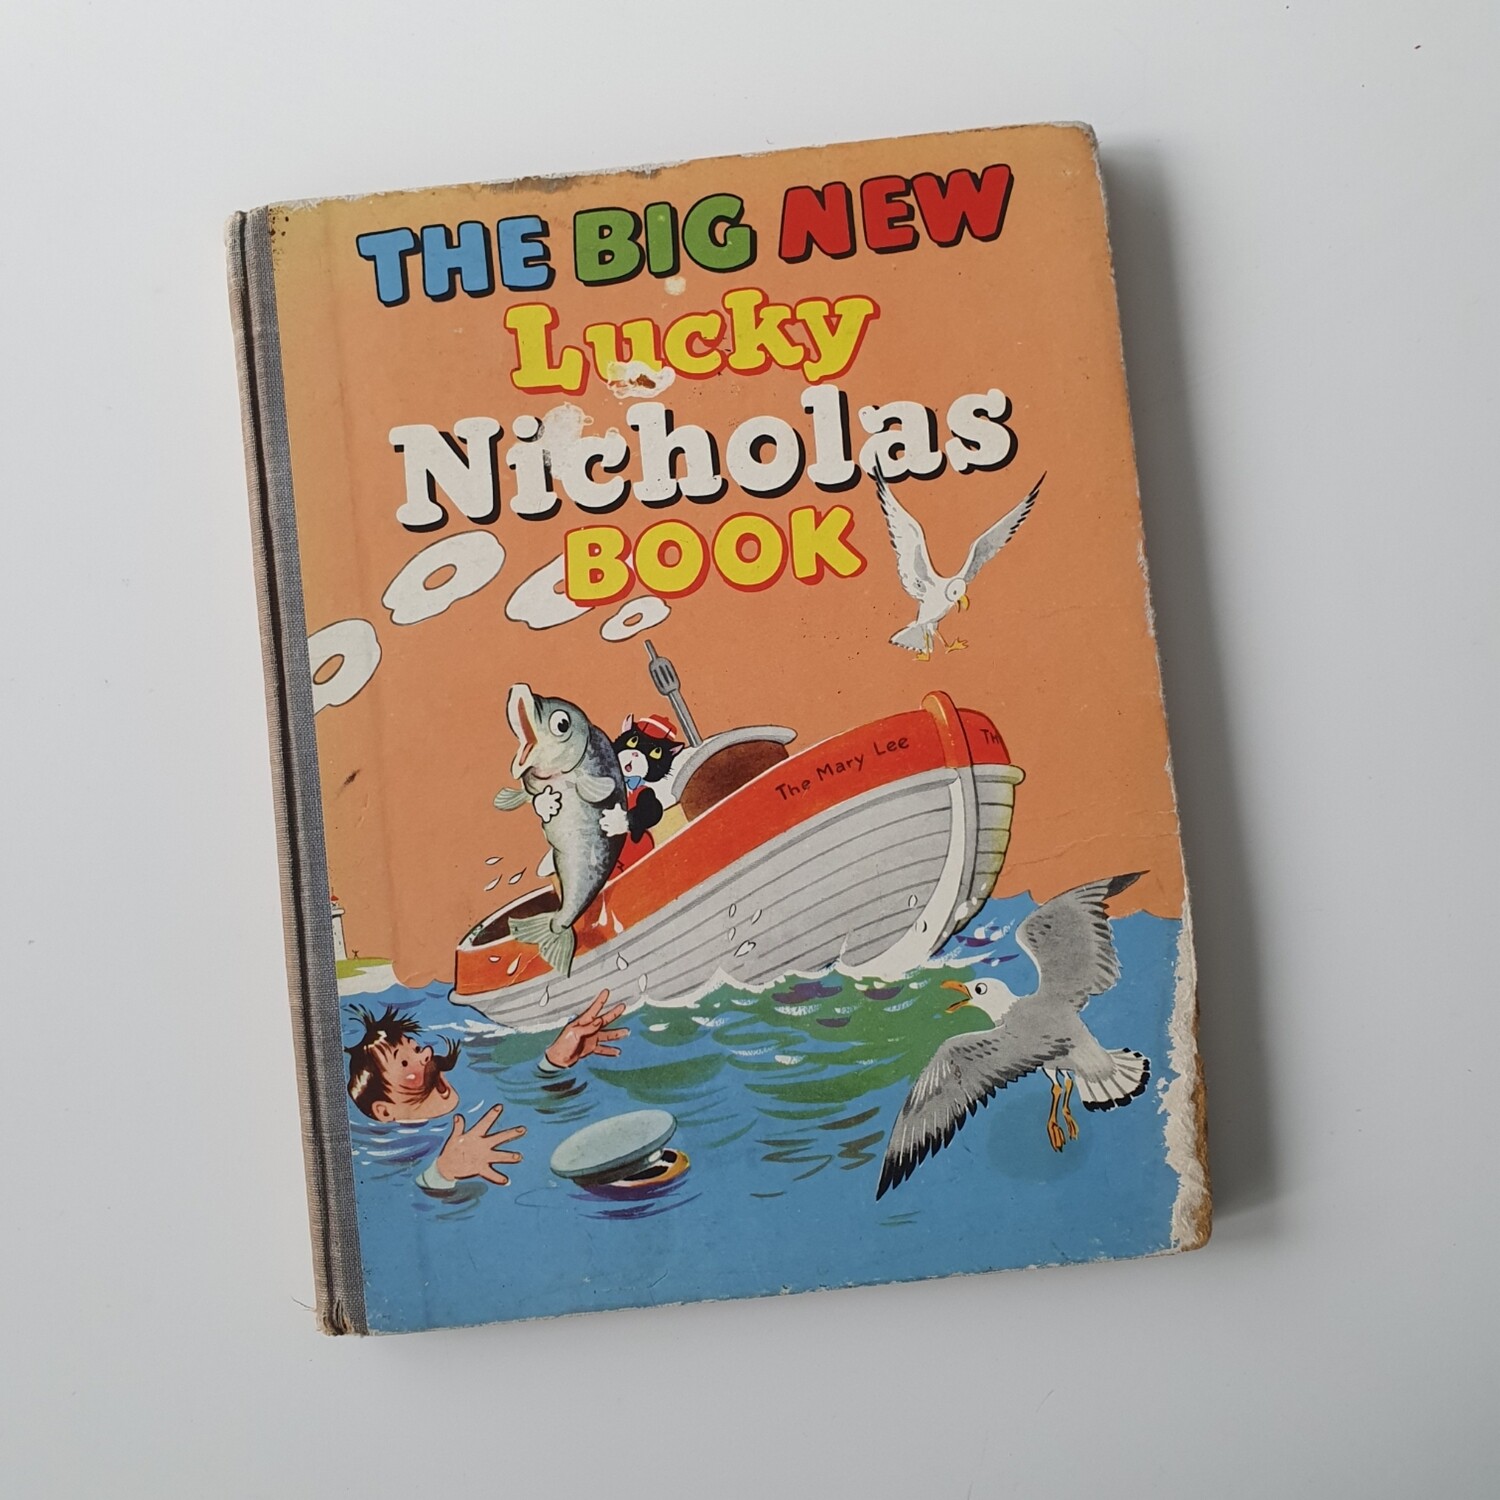 The Big New Lucky Nicholas Book - fishing boat